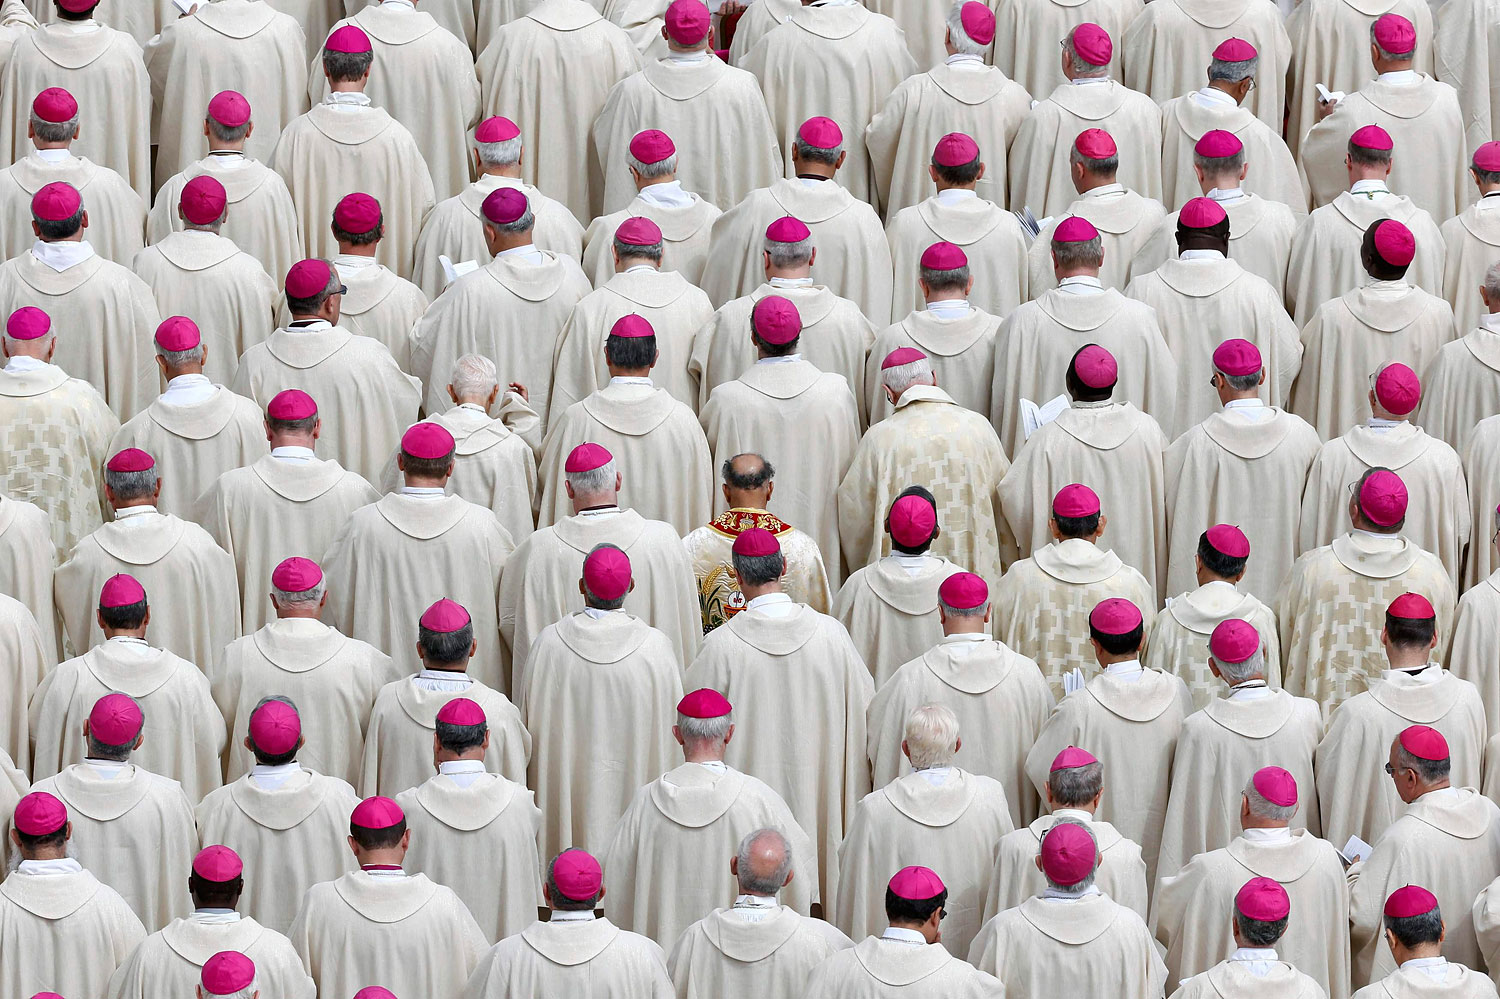 Bishops  during the canonisation mass.